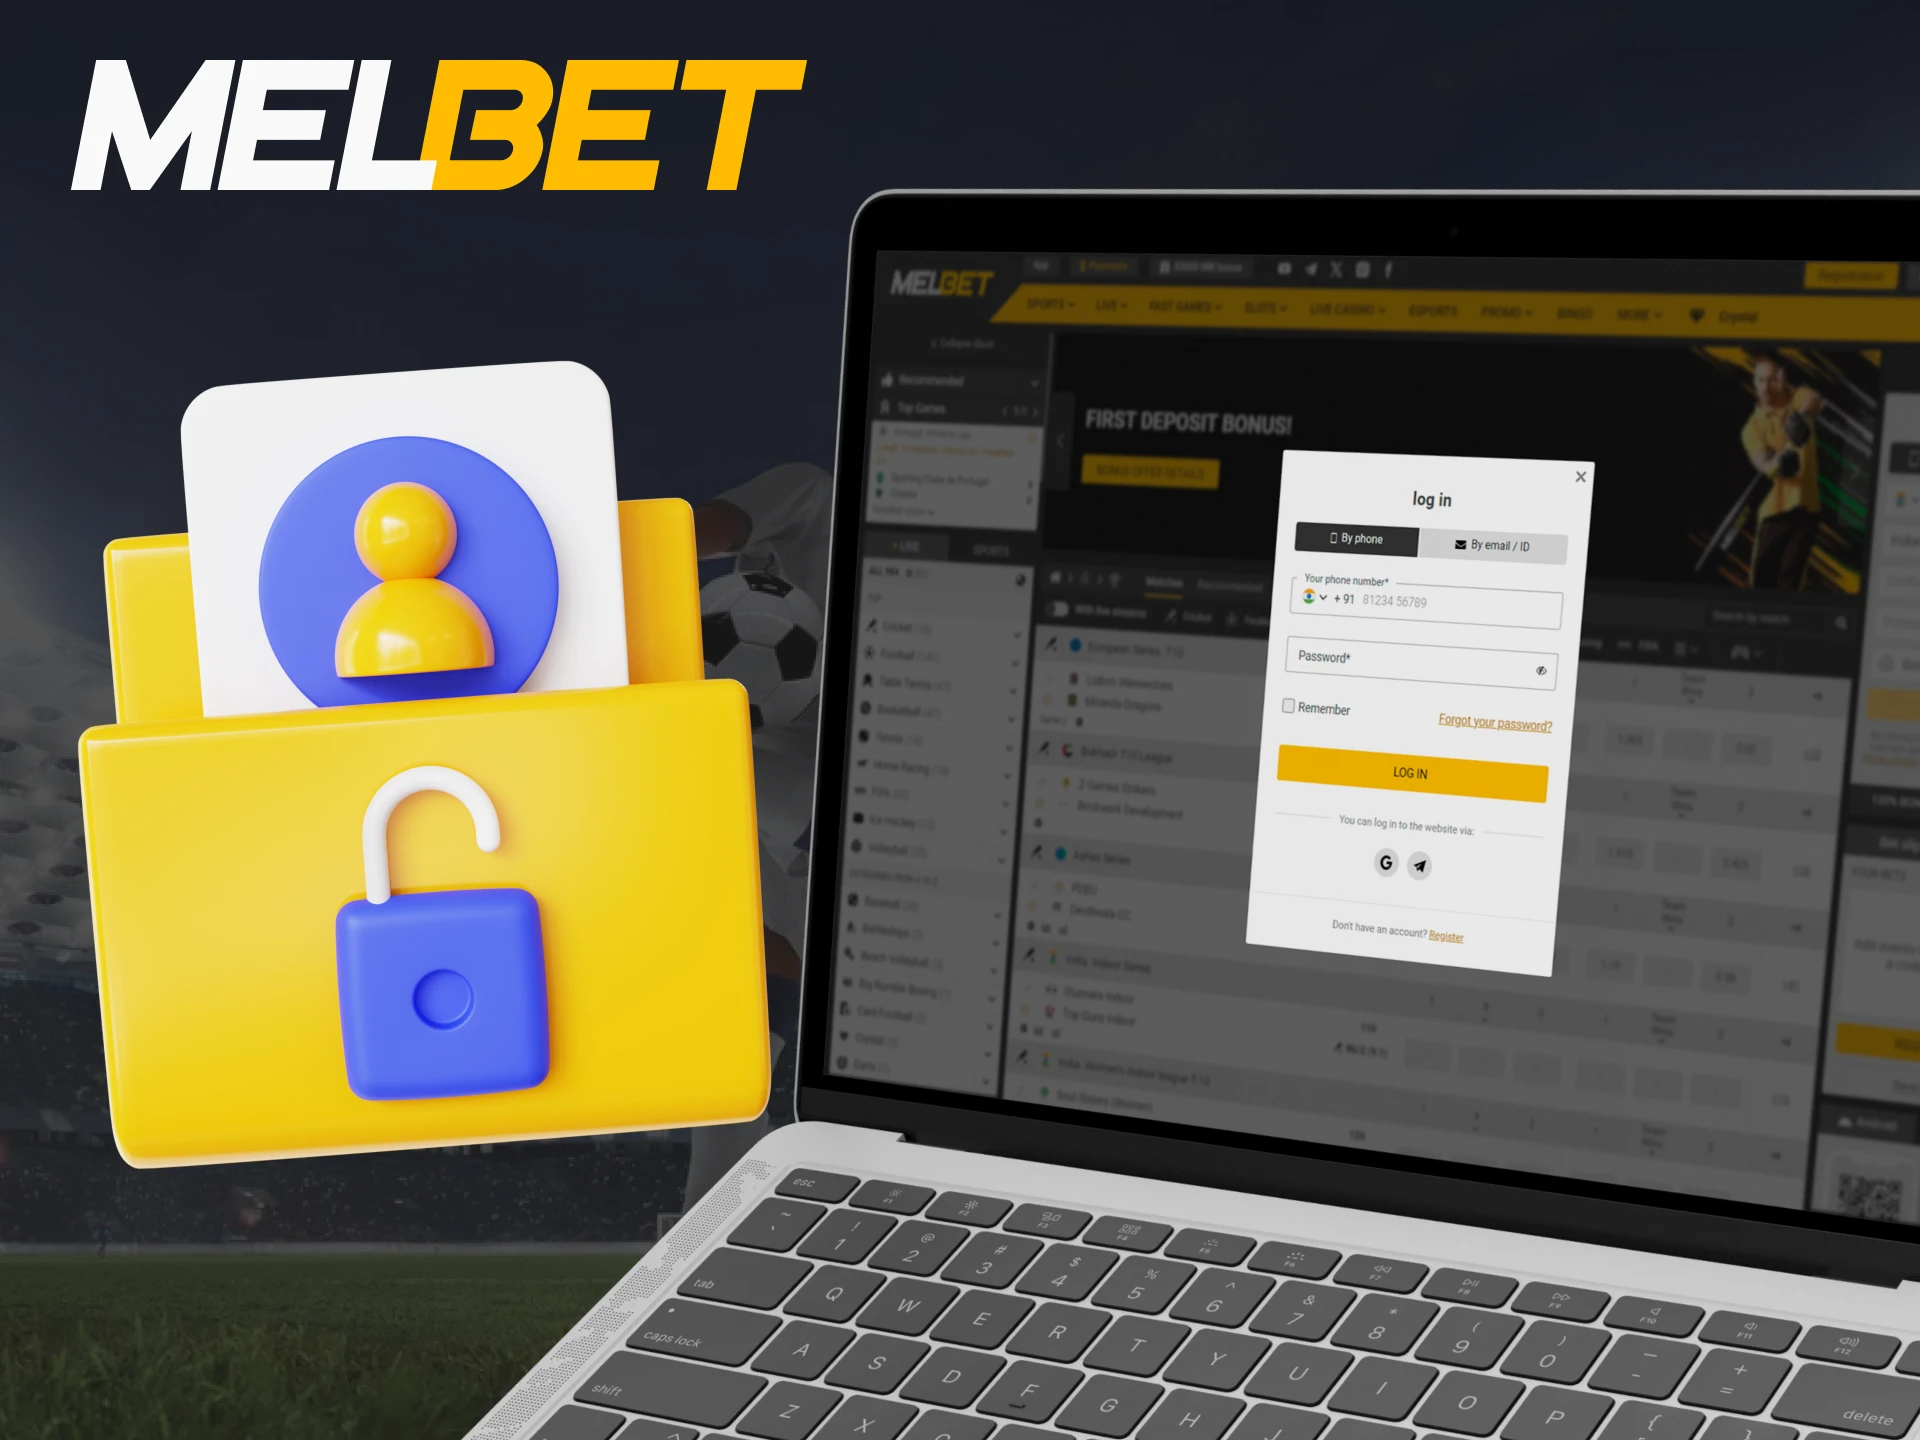 Follow this guide to login to your Melbet account.